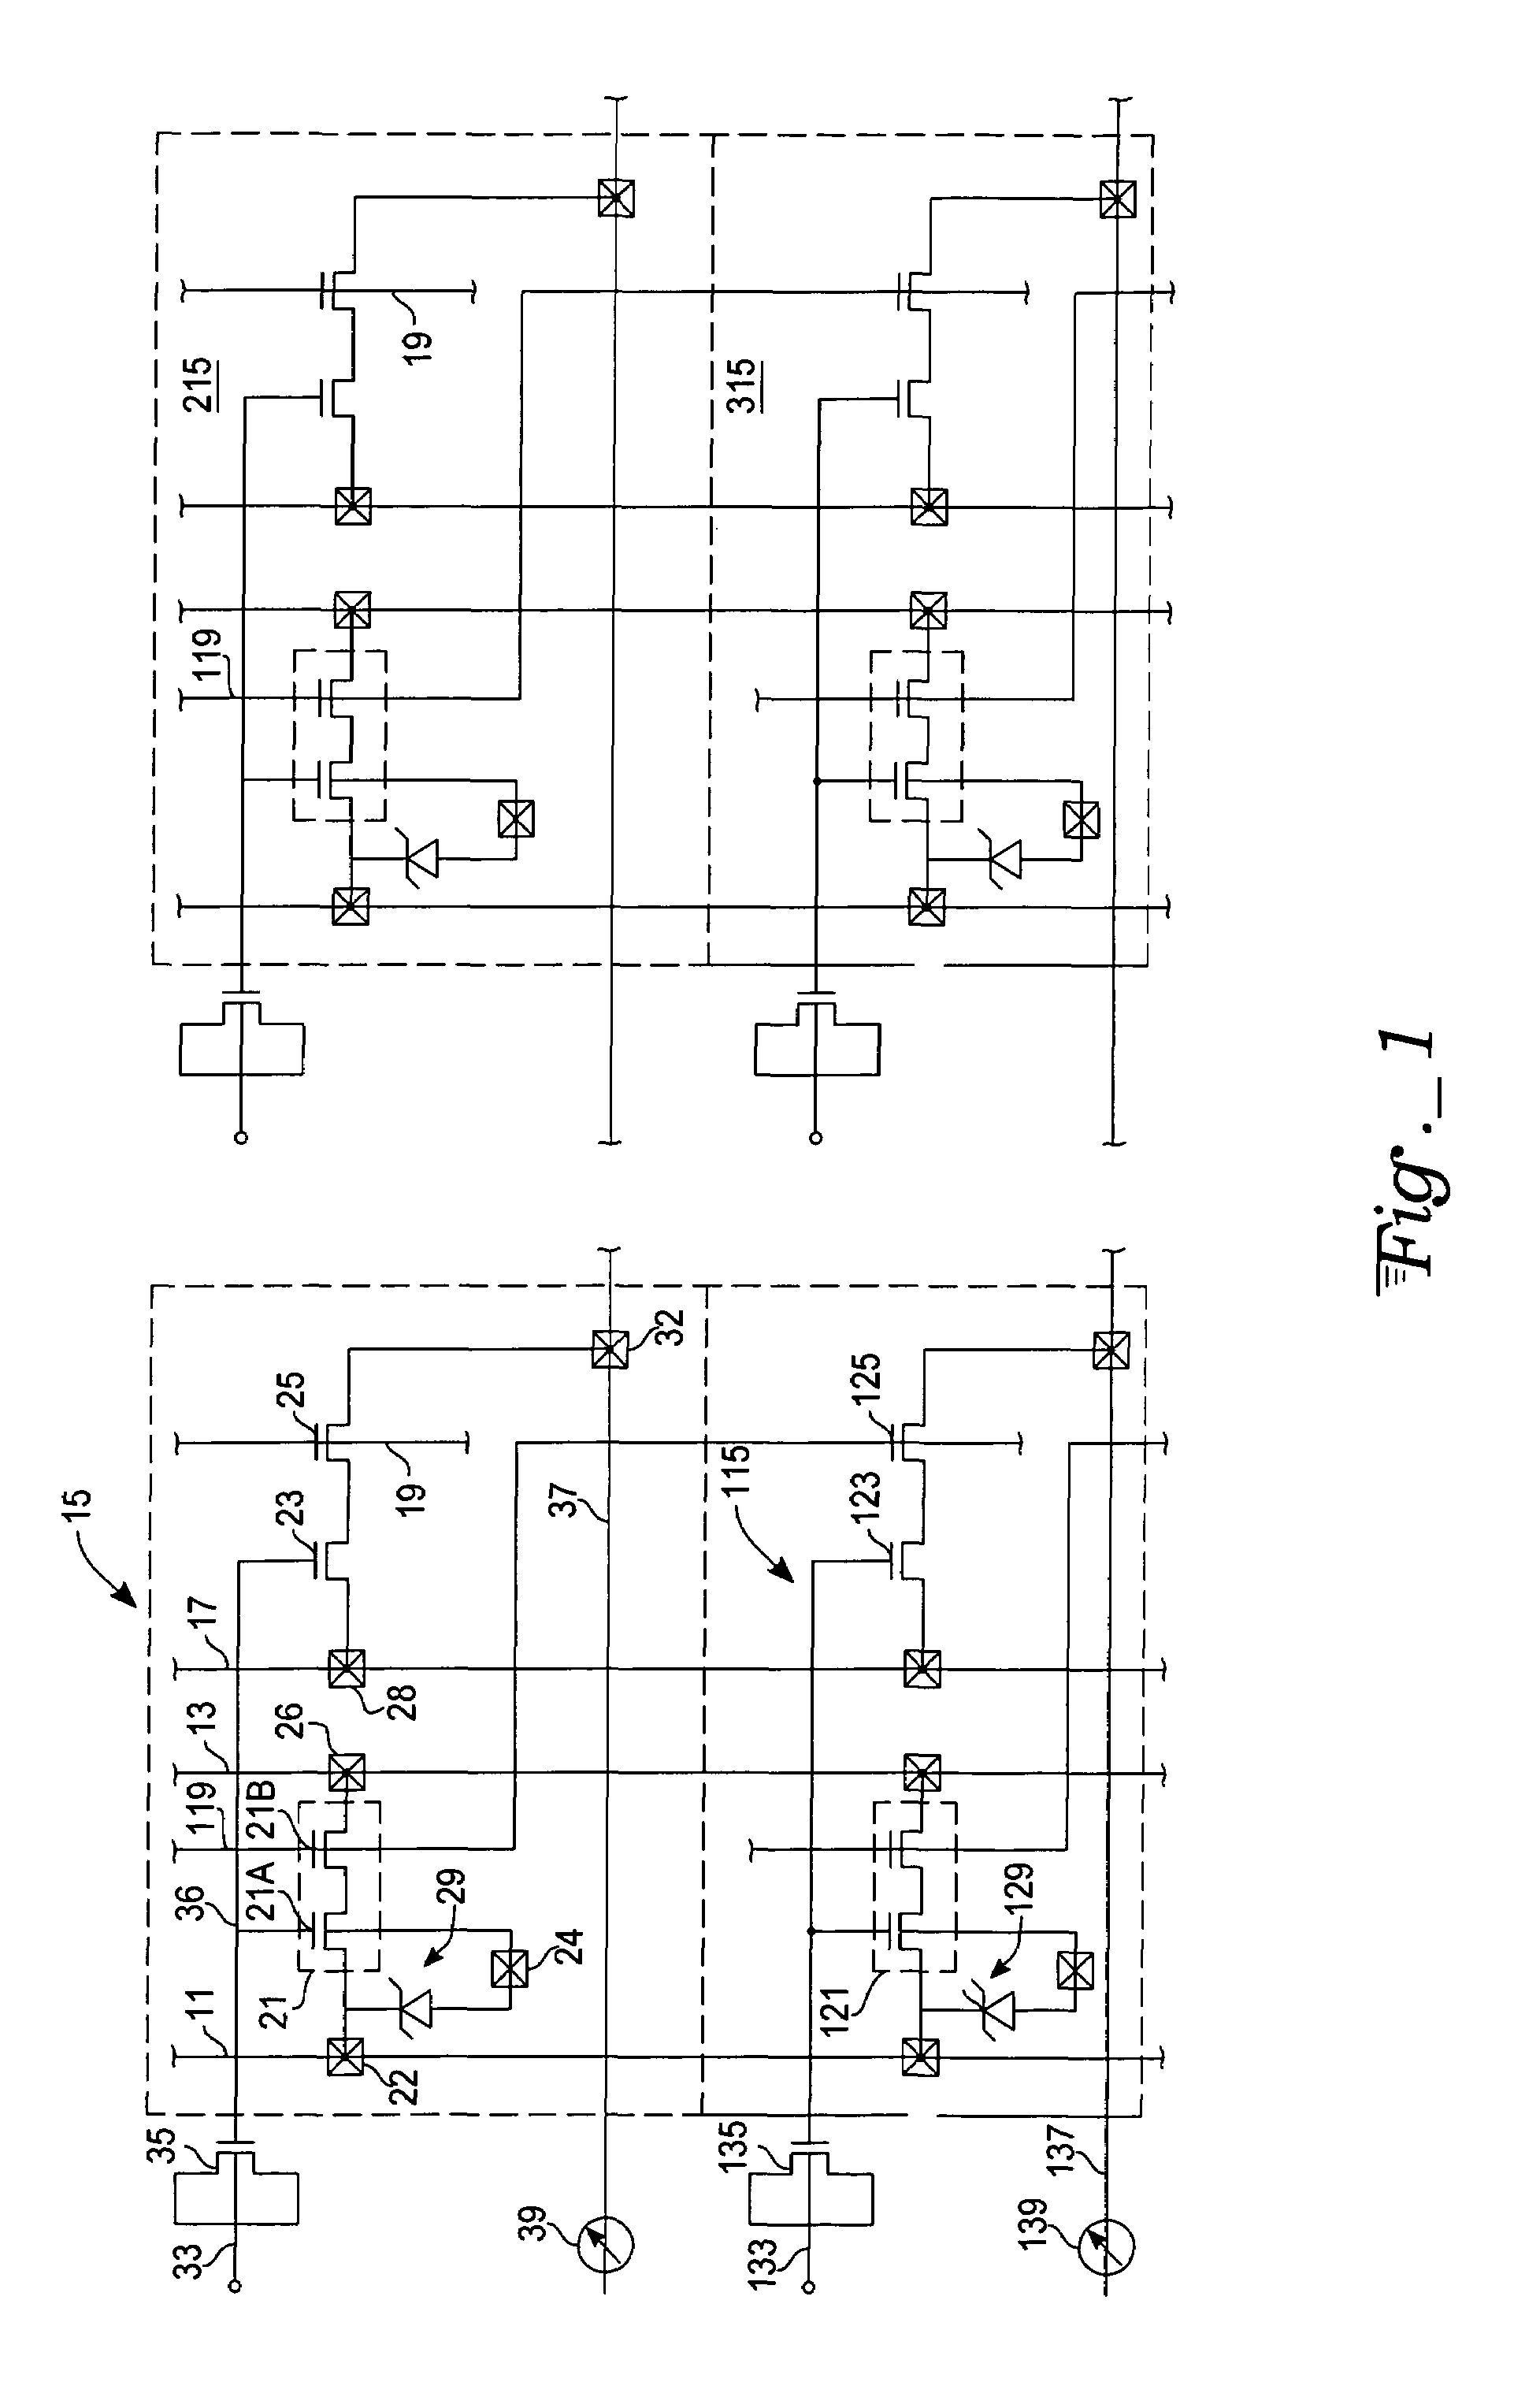 Non-volatile memory array with simultaneous write and erase feature